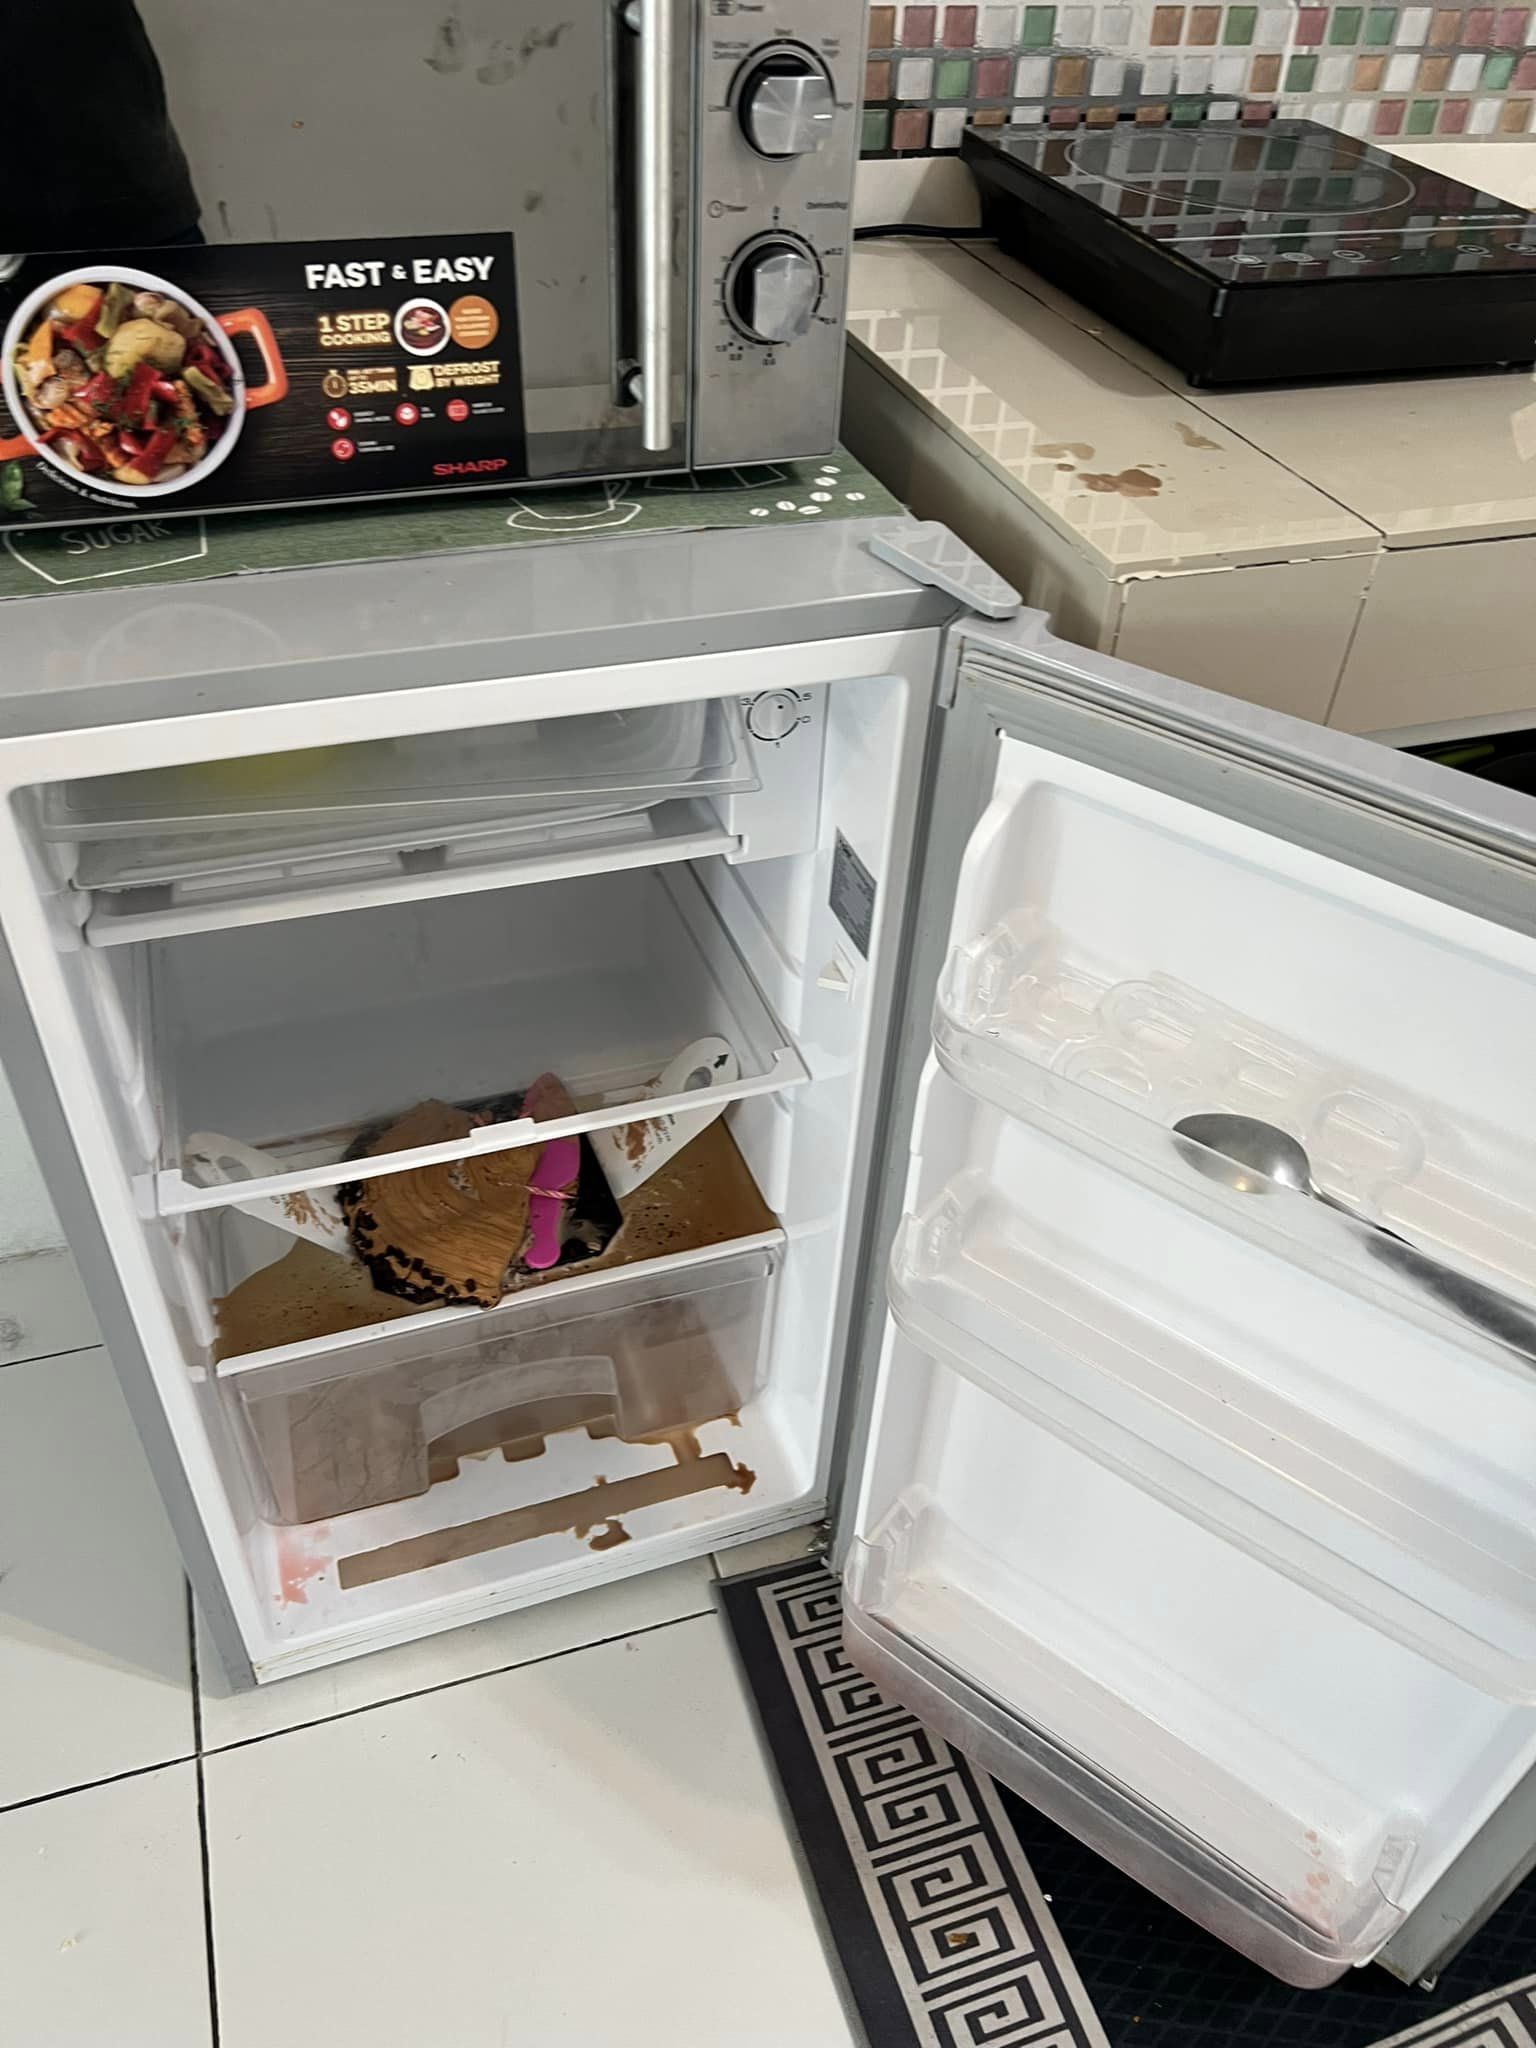 A leftover cake and chocolate spill was found in the fridge. Image credit: Nur Izzati Nadia